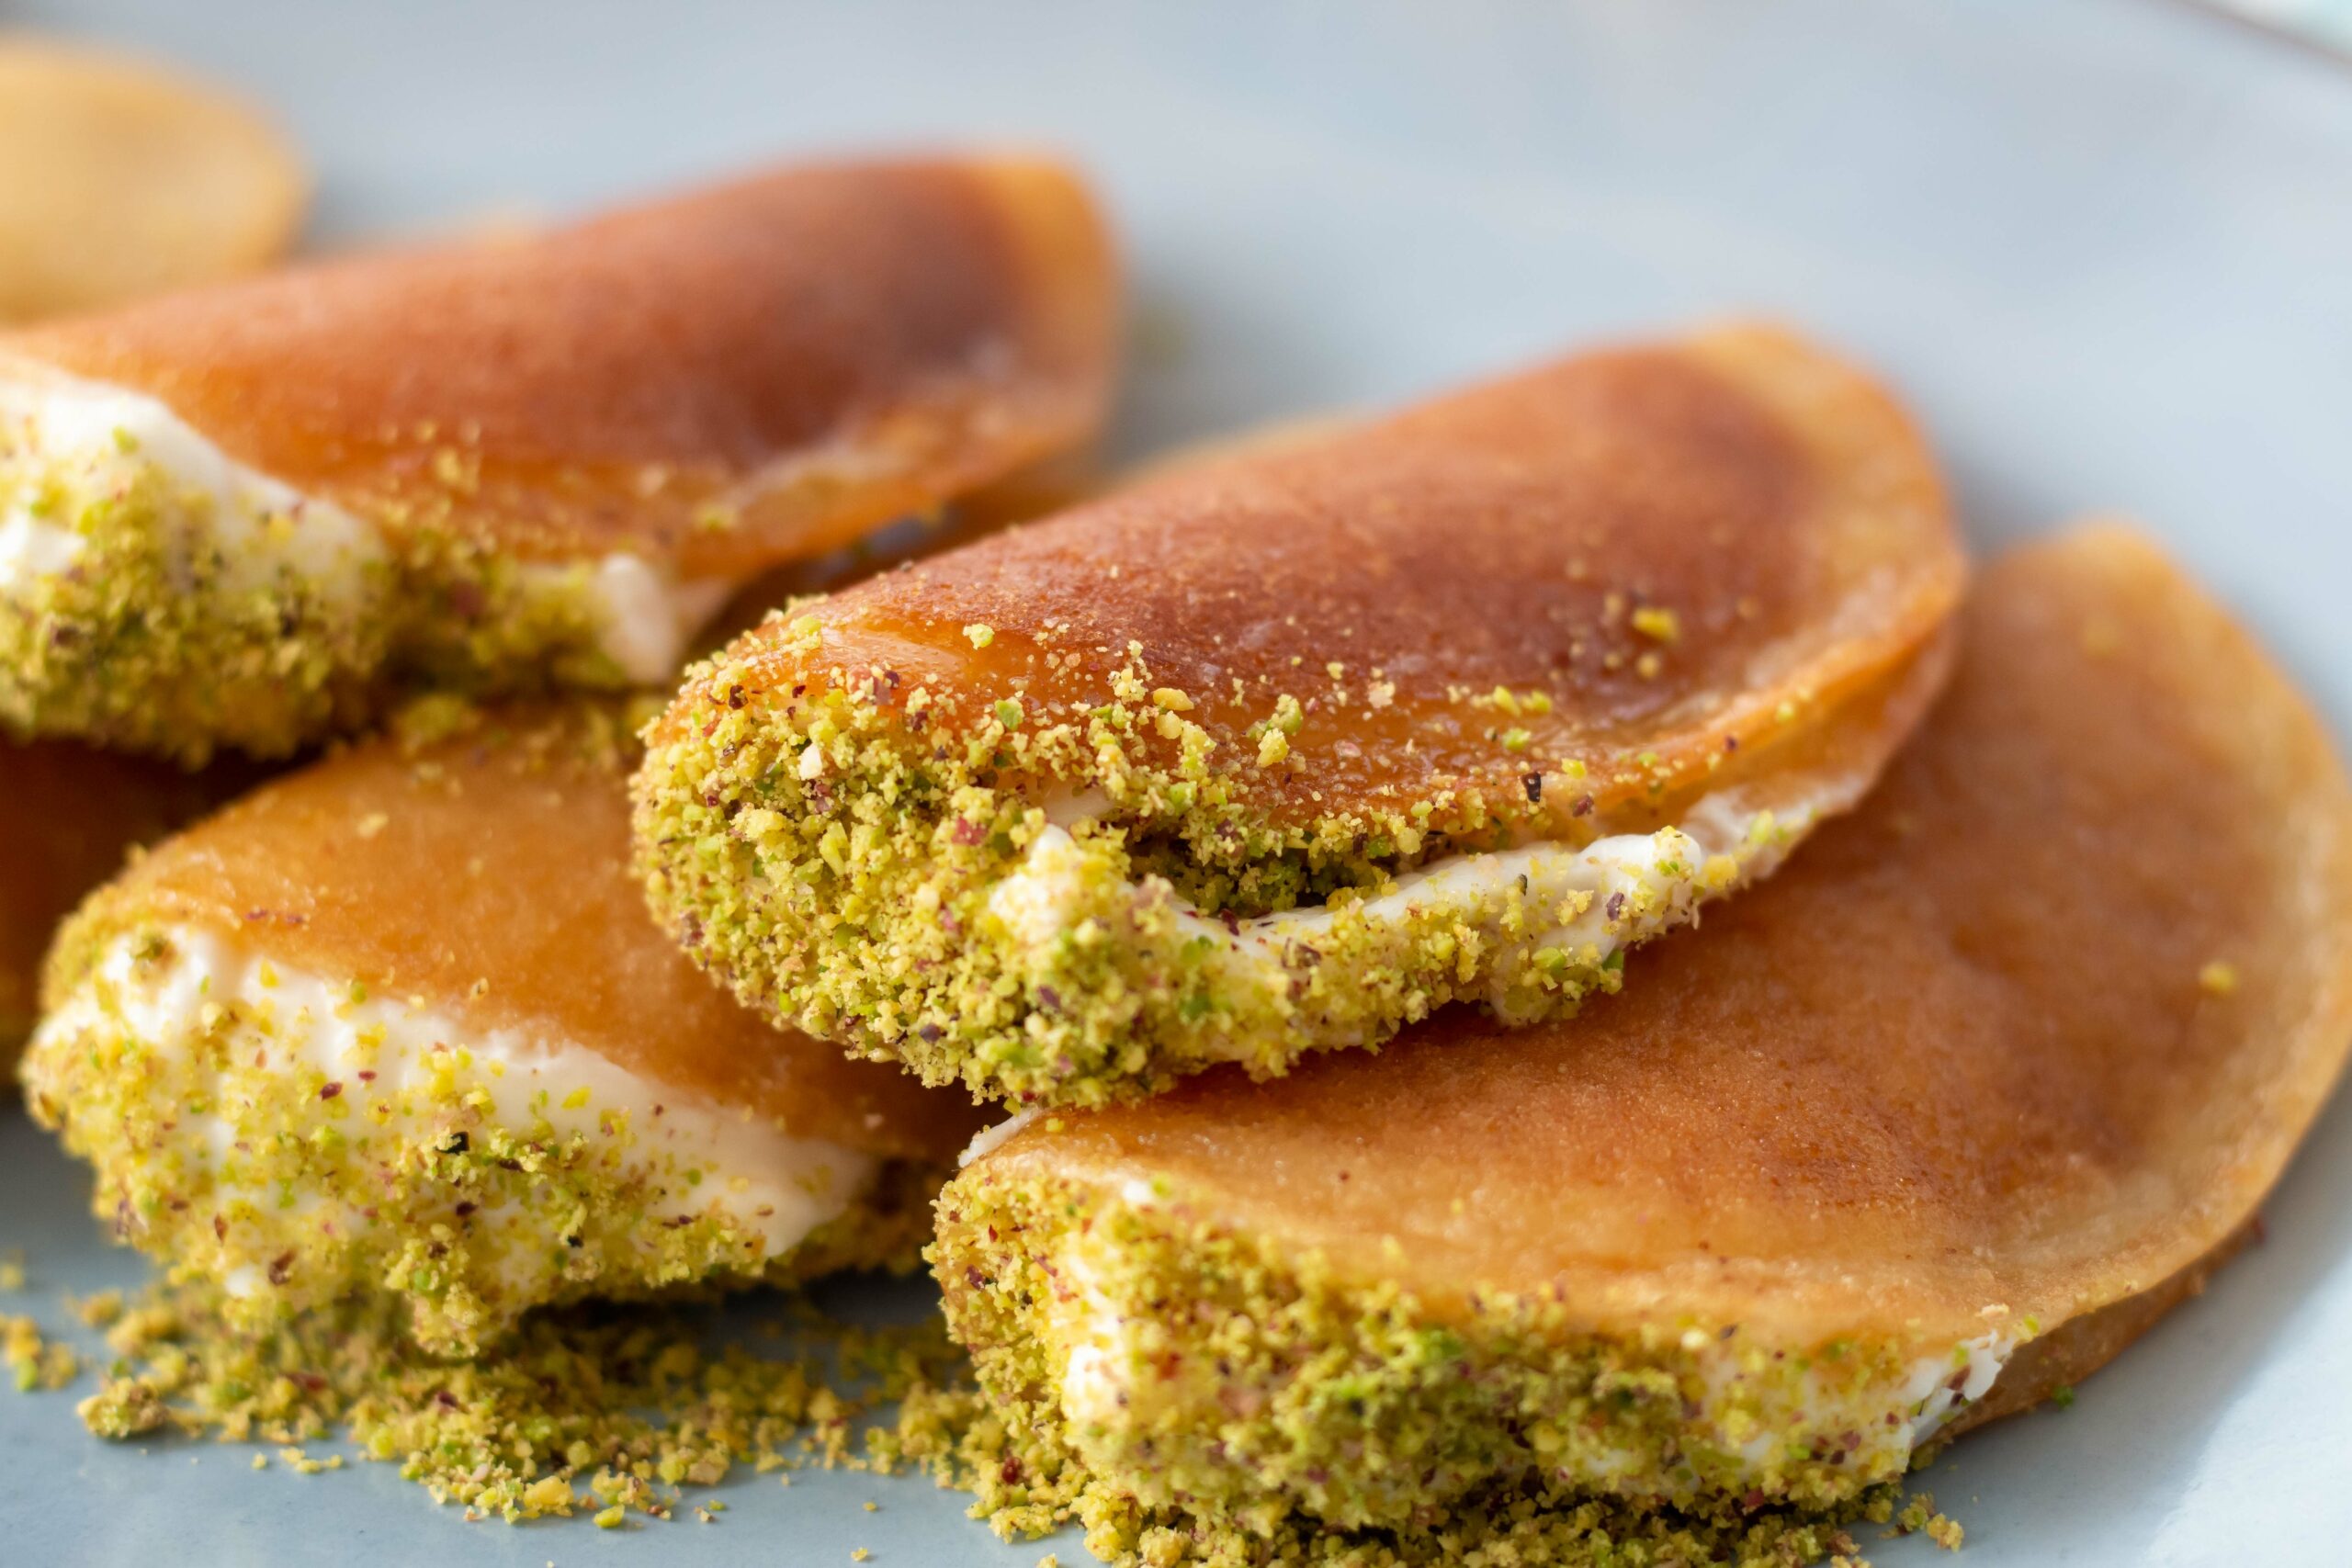 Small pancakes folded over cheese and finished with pistachios